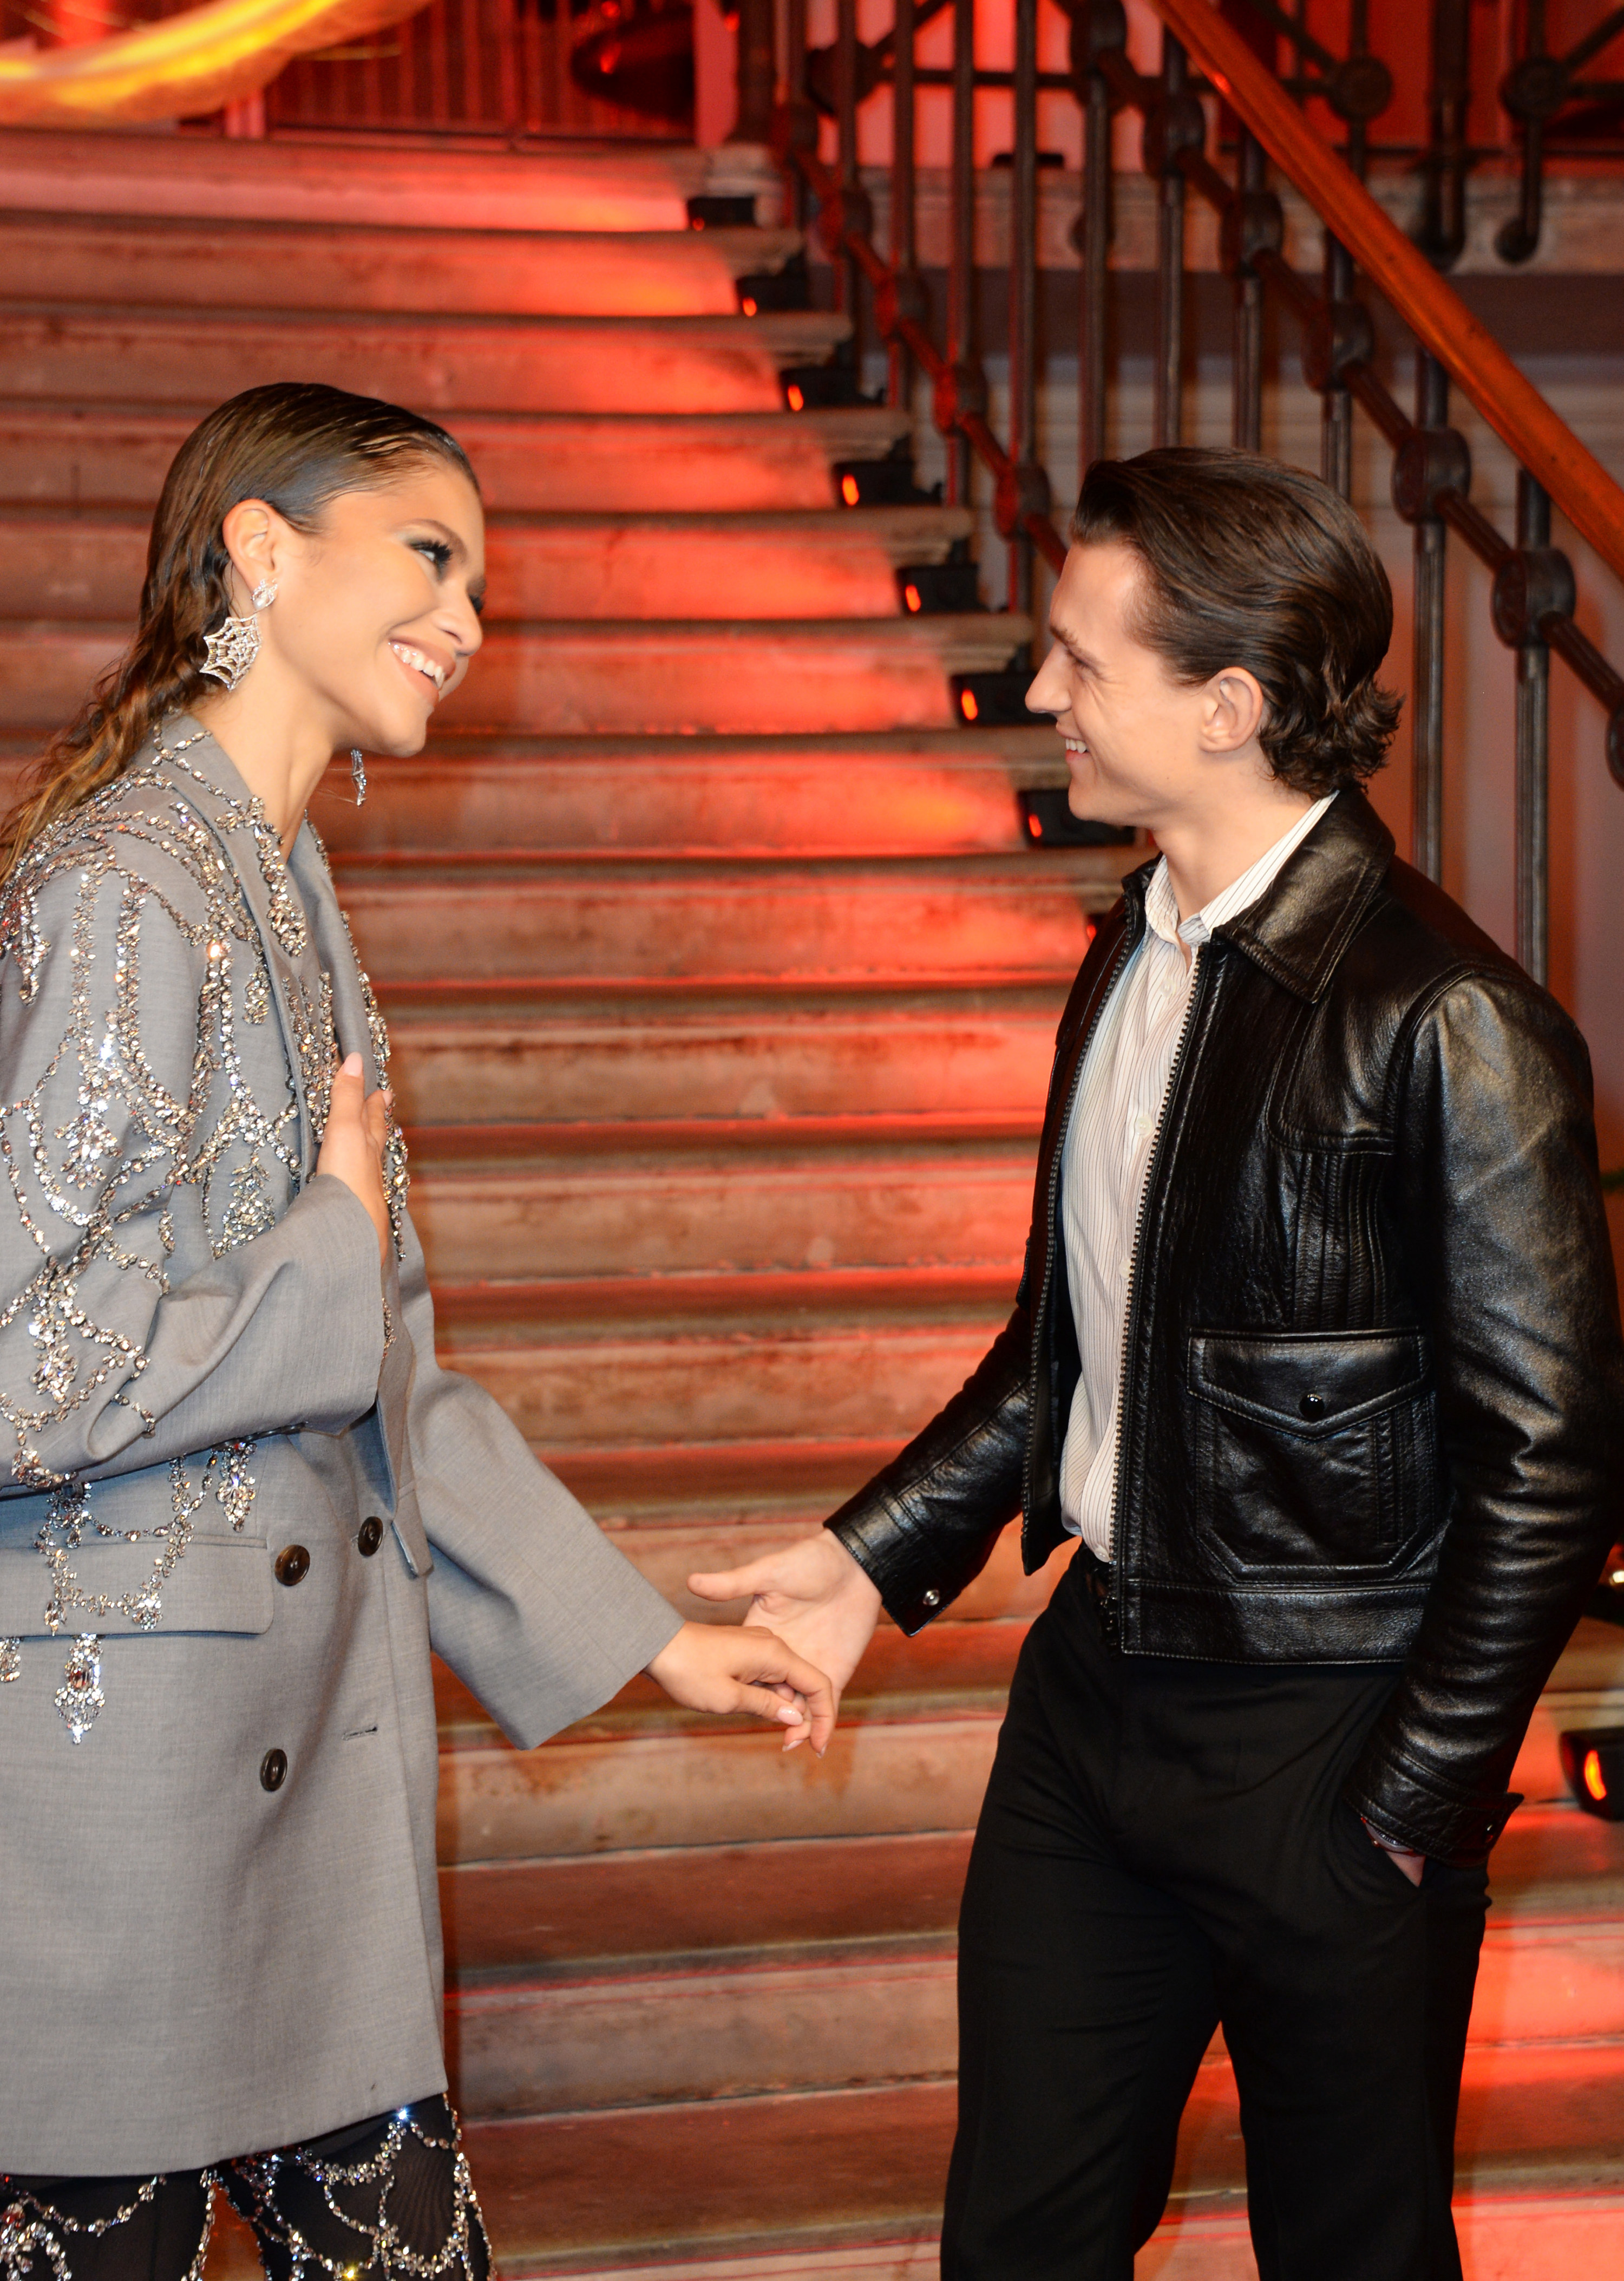 Zendaya and Tom holding hands and laughing